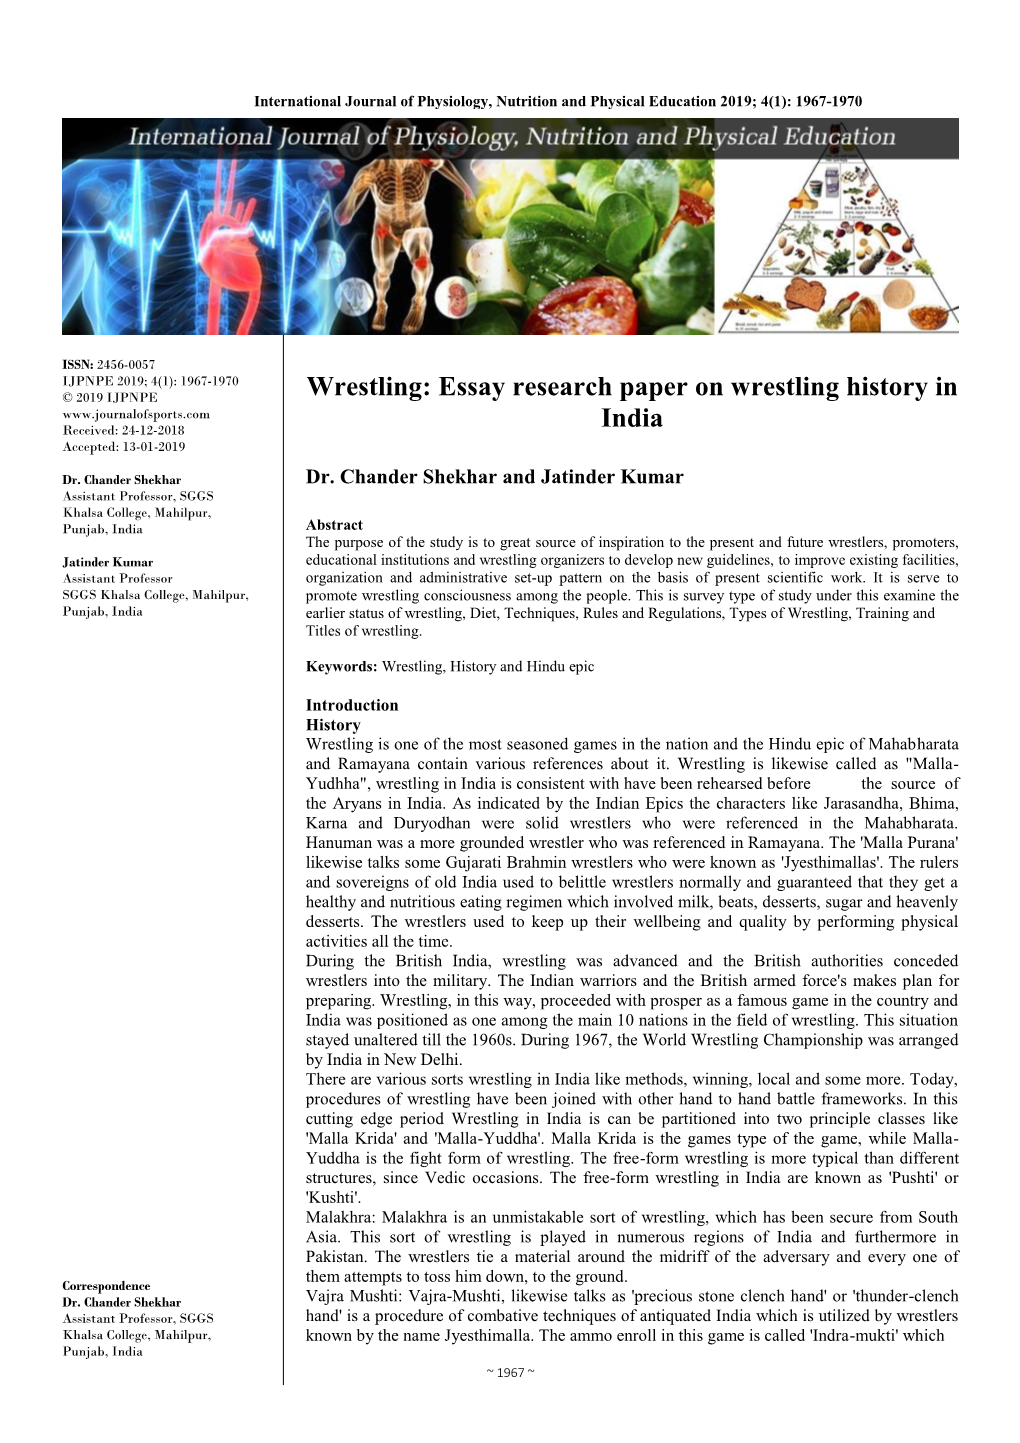 Wrestling: Essay Research Paper on Wrestling History in Received: 24-12-2018 India Accepted: 13-01-2019